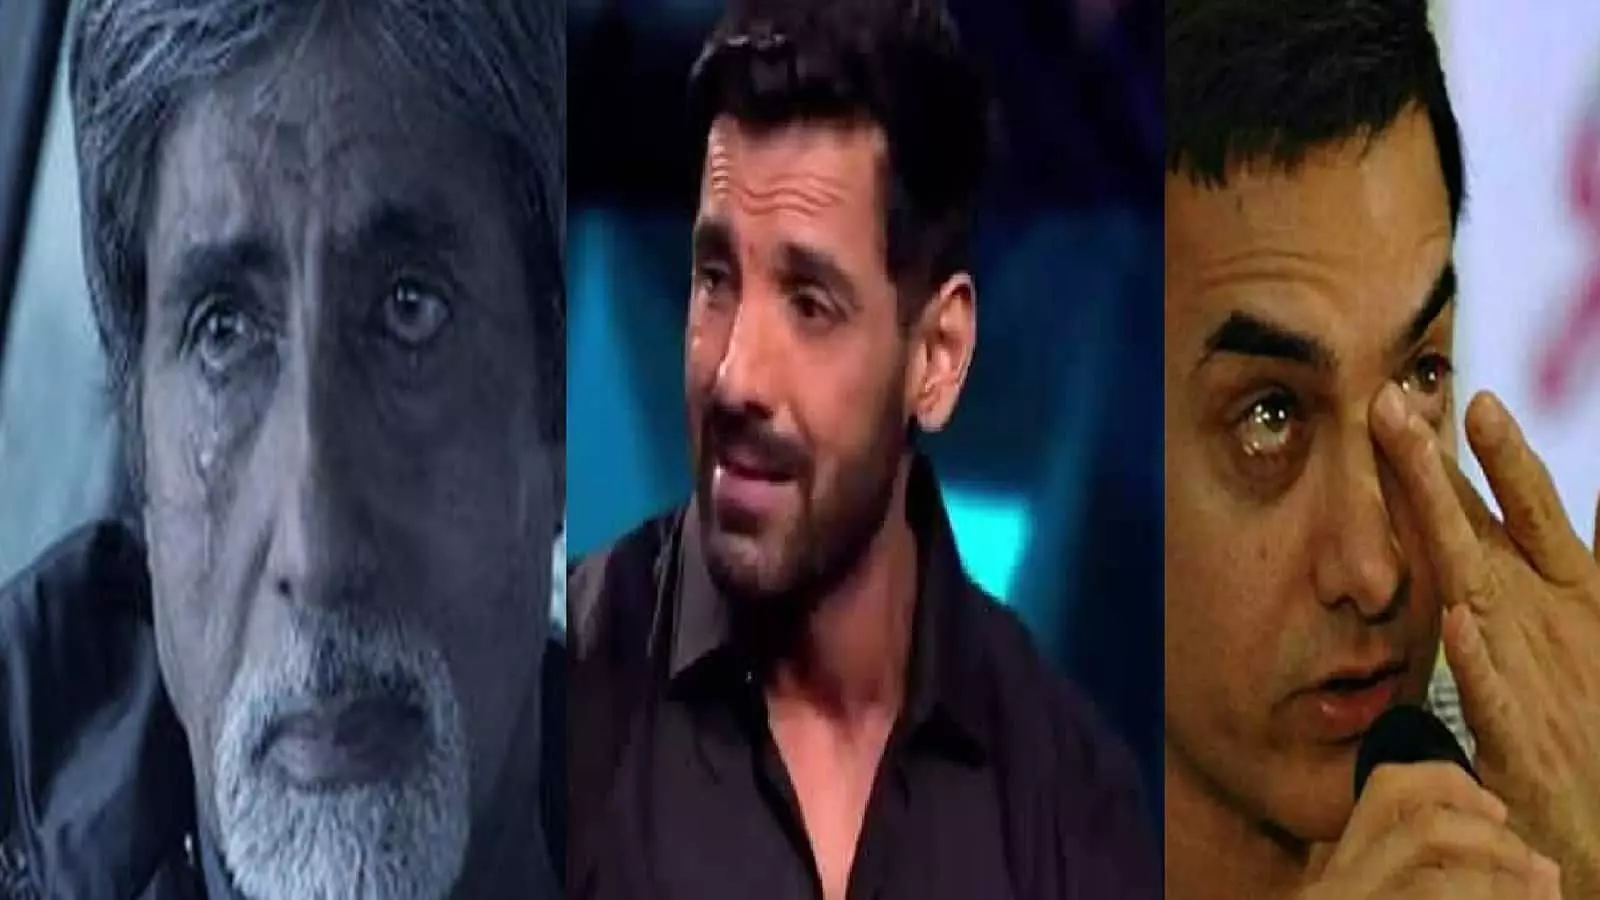 When these actors wept bitterly their tears could not stop